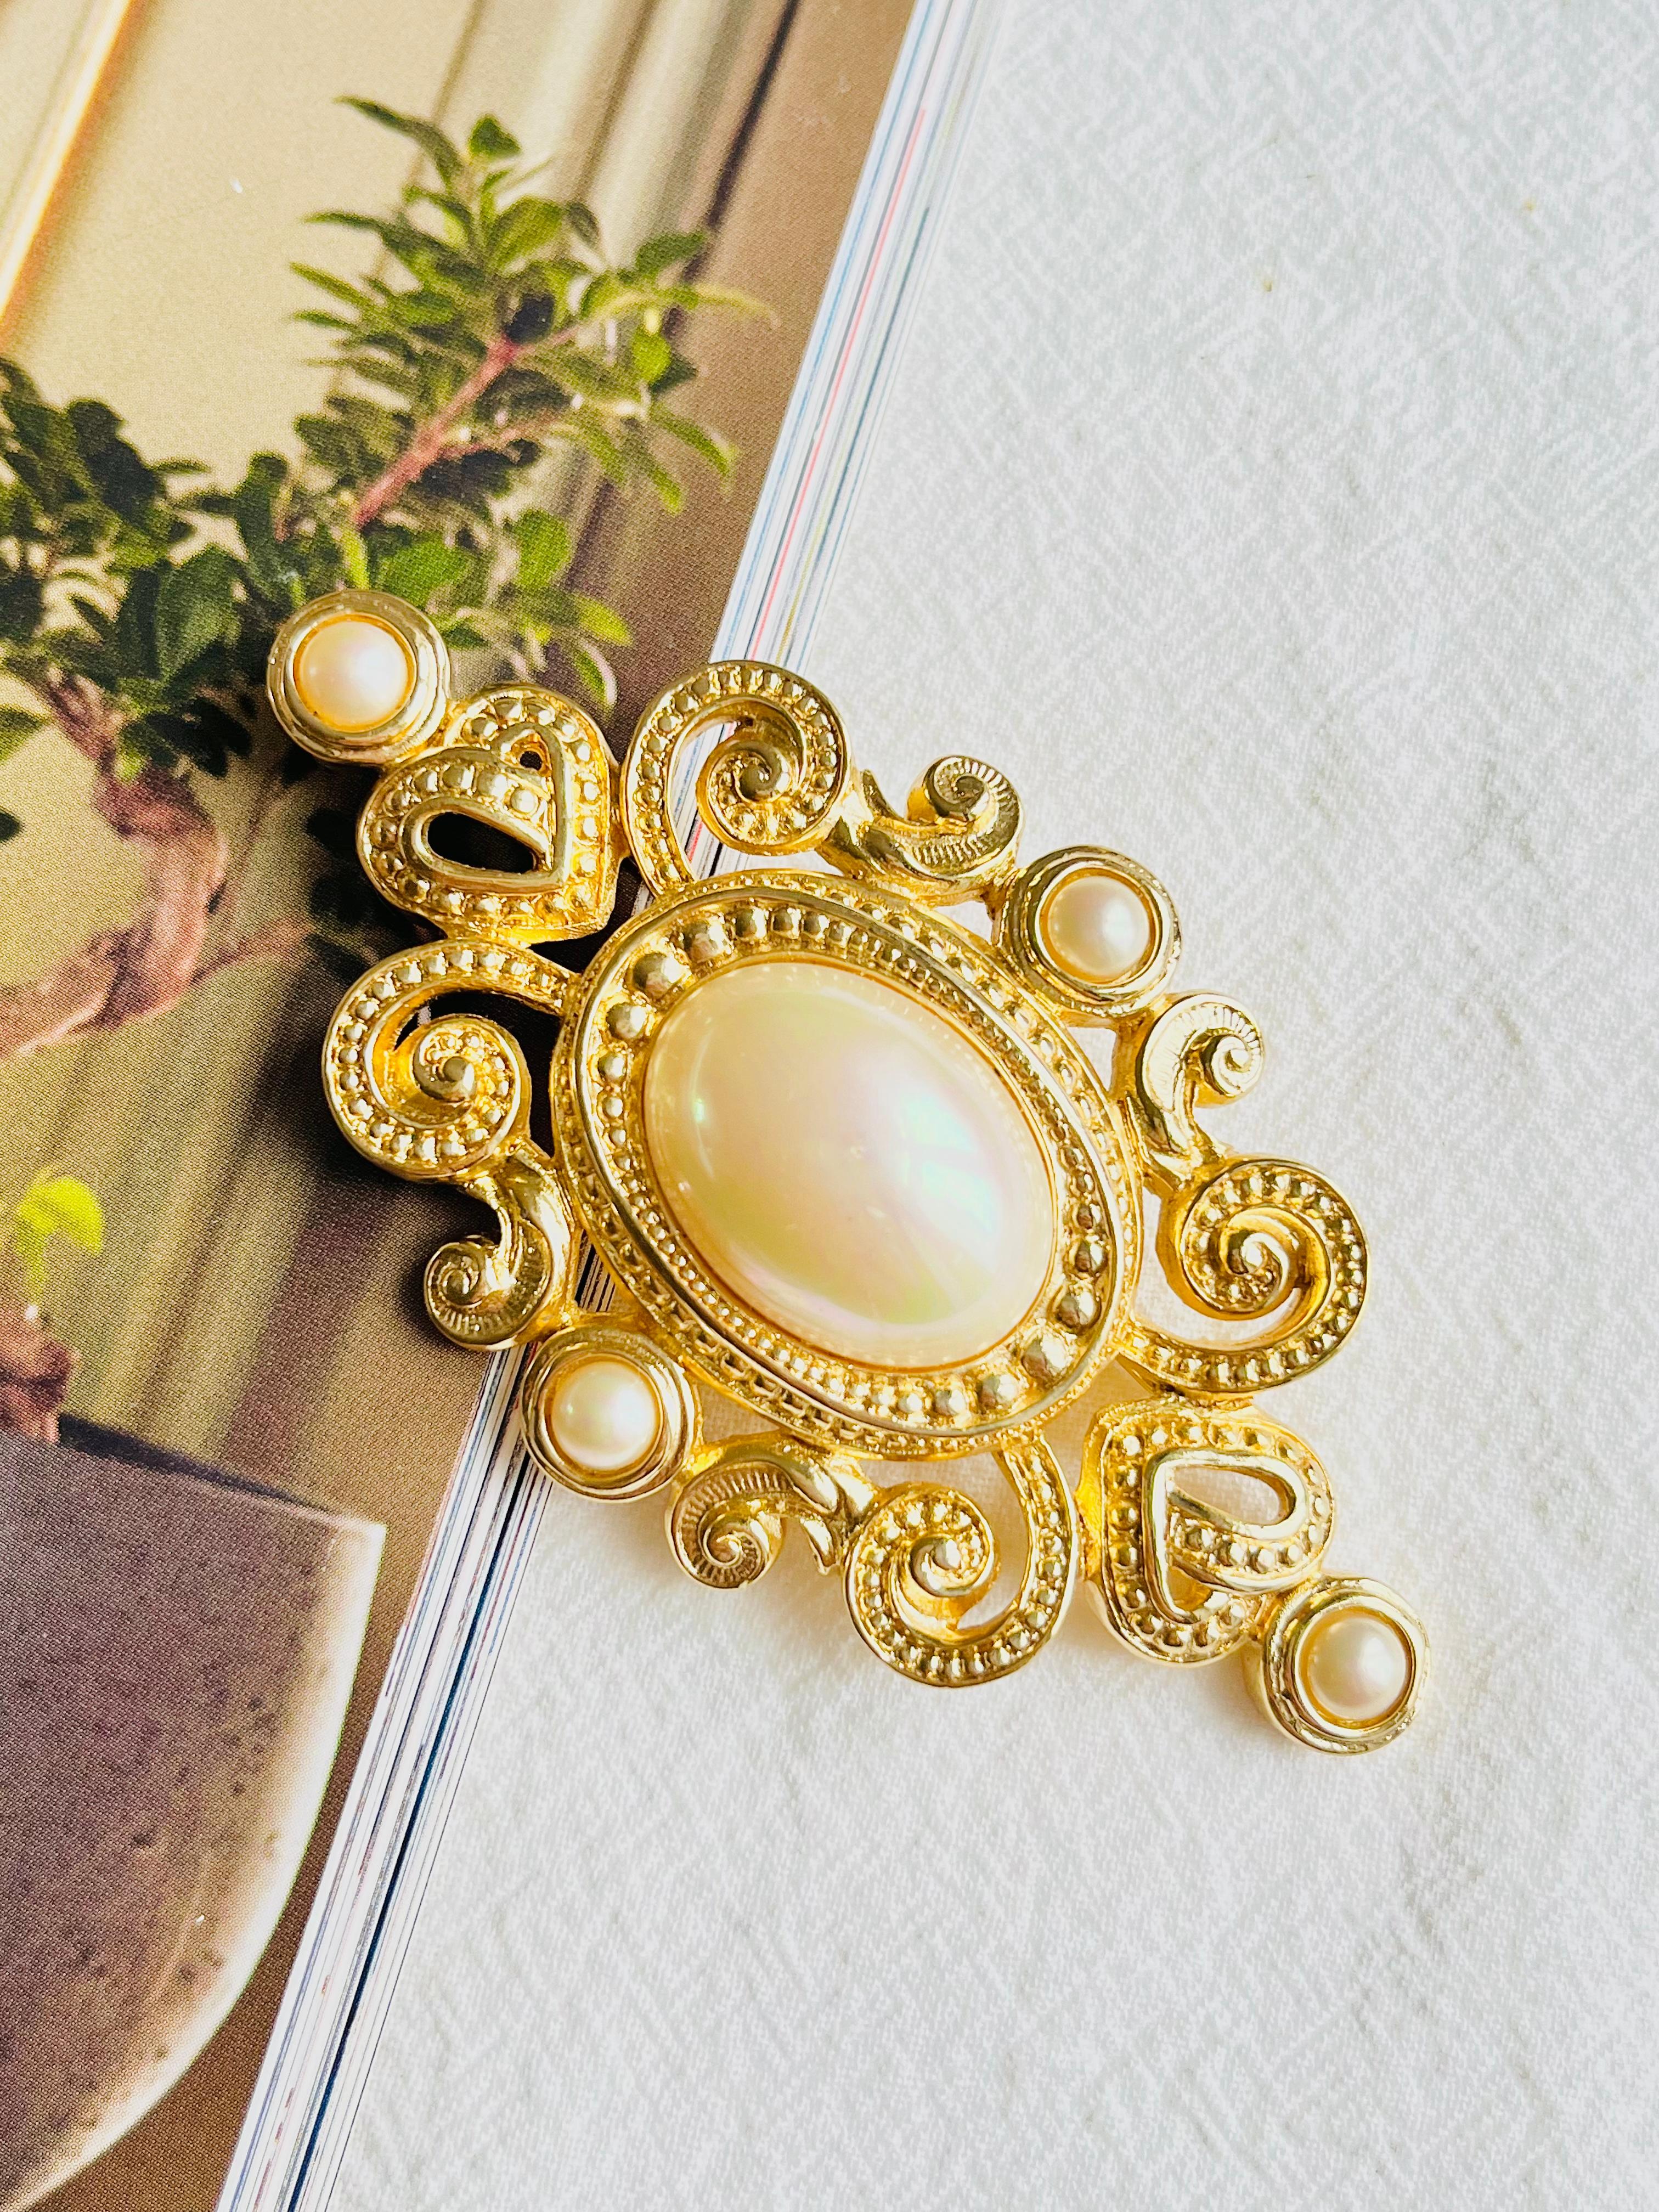 Very excellent condition (very tiny scratches, no loss of colour).
A unique piece. This is gold plated stylised brooch, dating to the 1970s. 100% Genuine.

Safety-catch pin closure. Signed Chr. Dior on the back.

Size: 9.0 cm x 5.0 cm.

_ _ _

Great